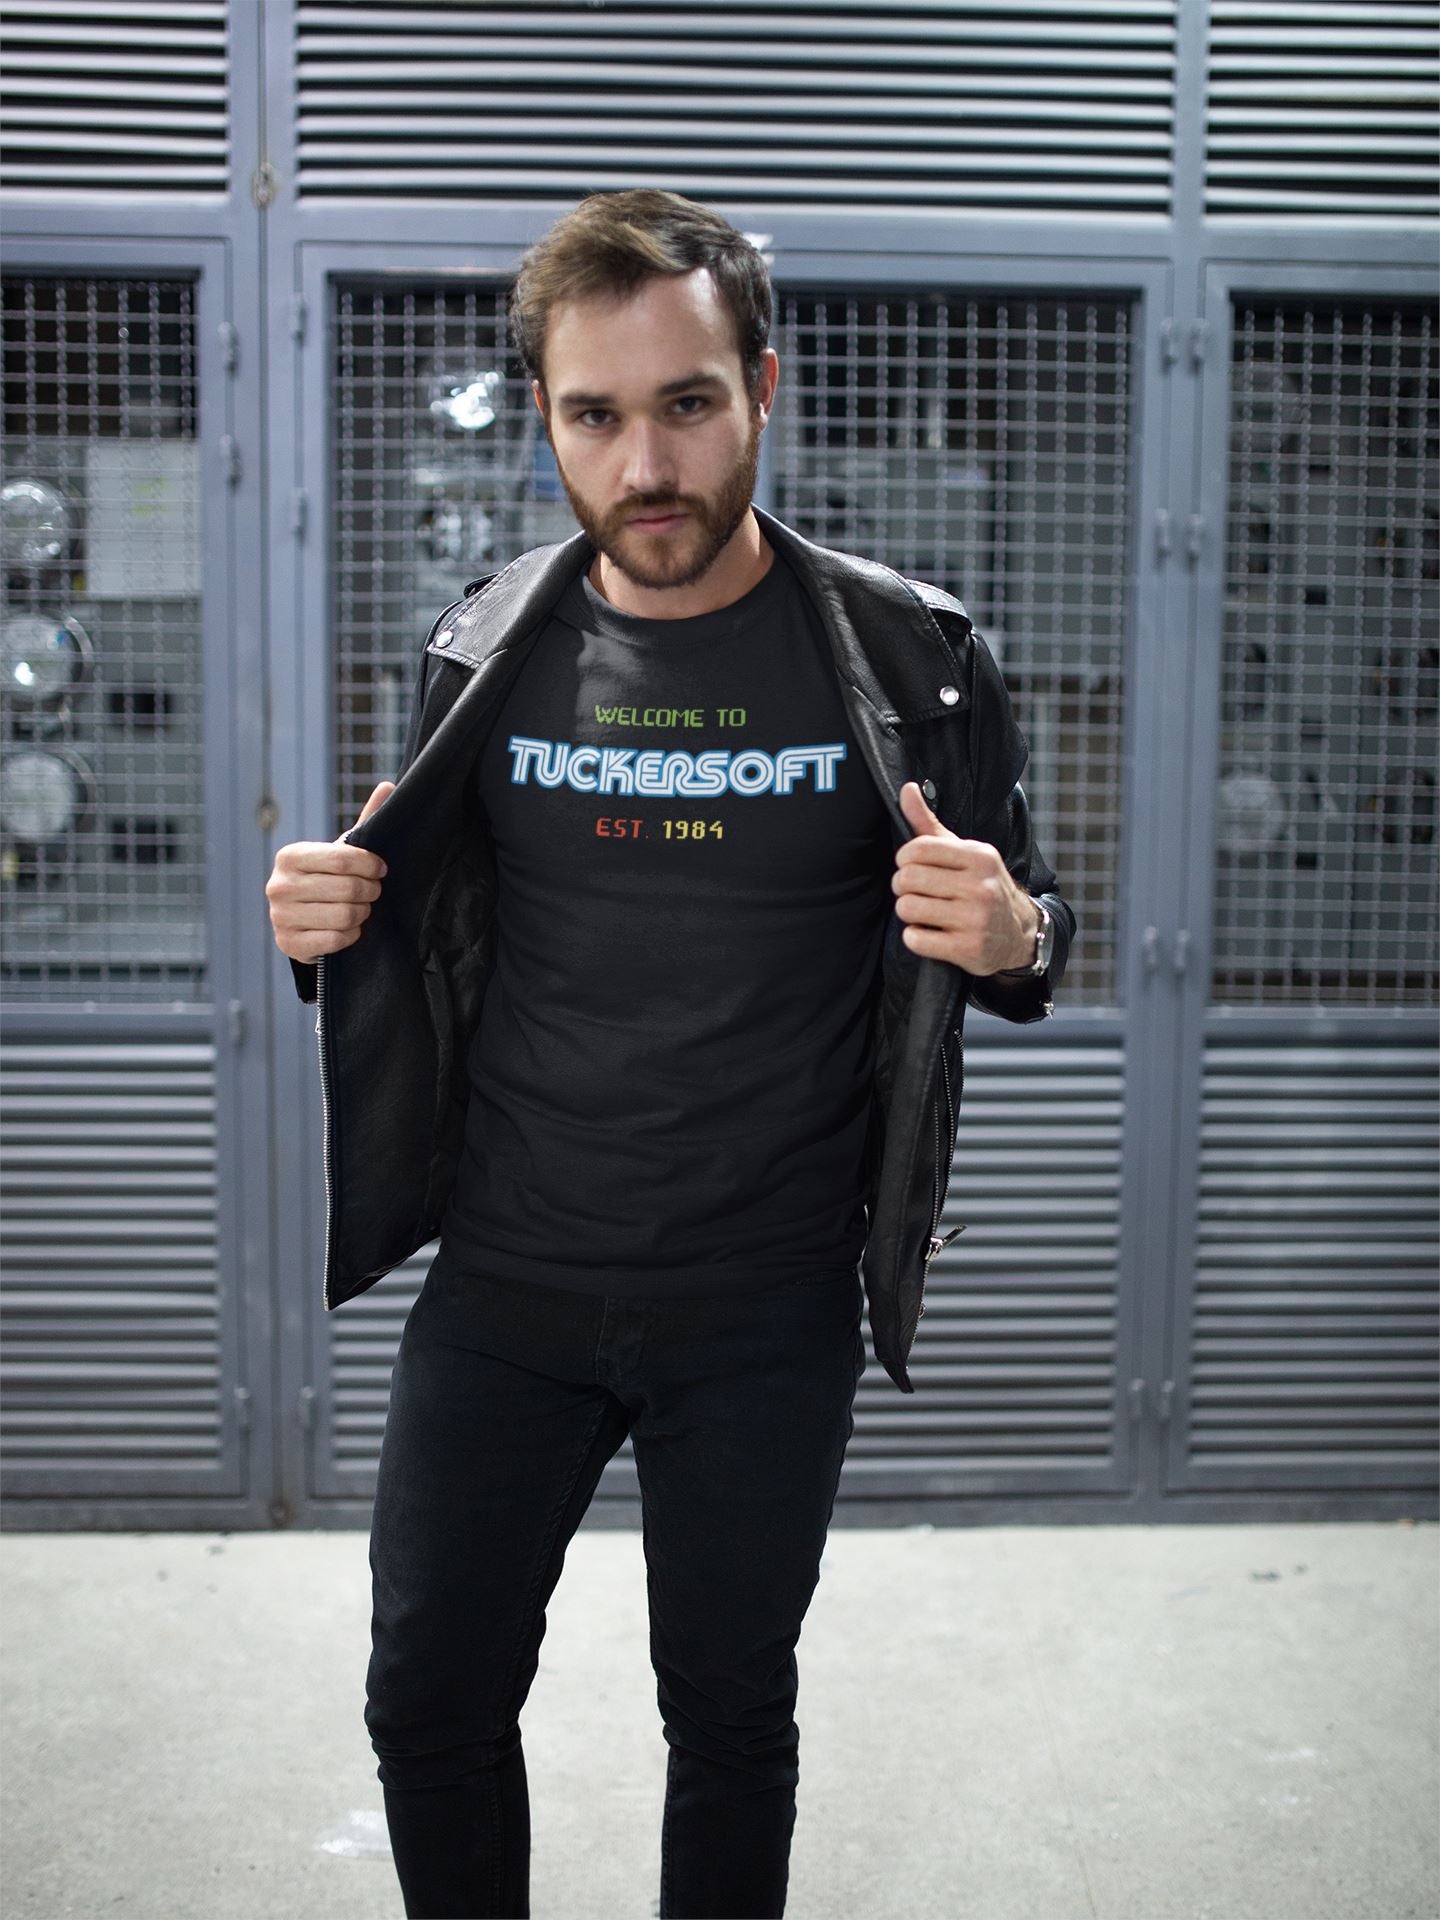 Tuckersoft T-Shirt In Black